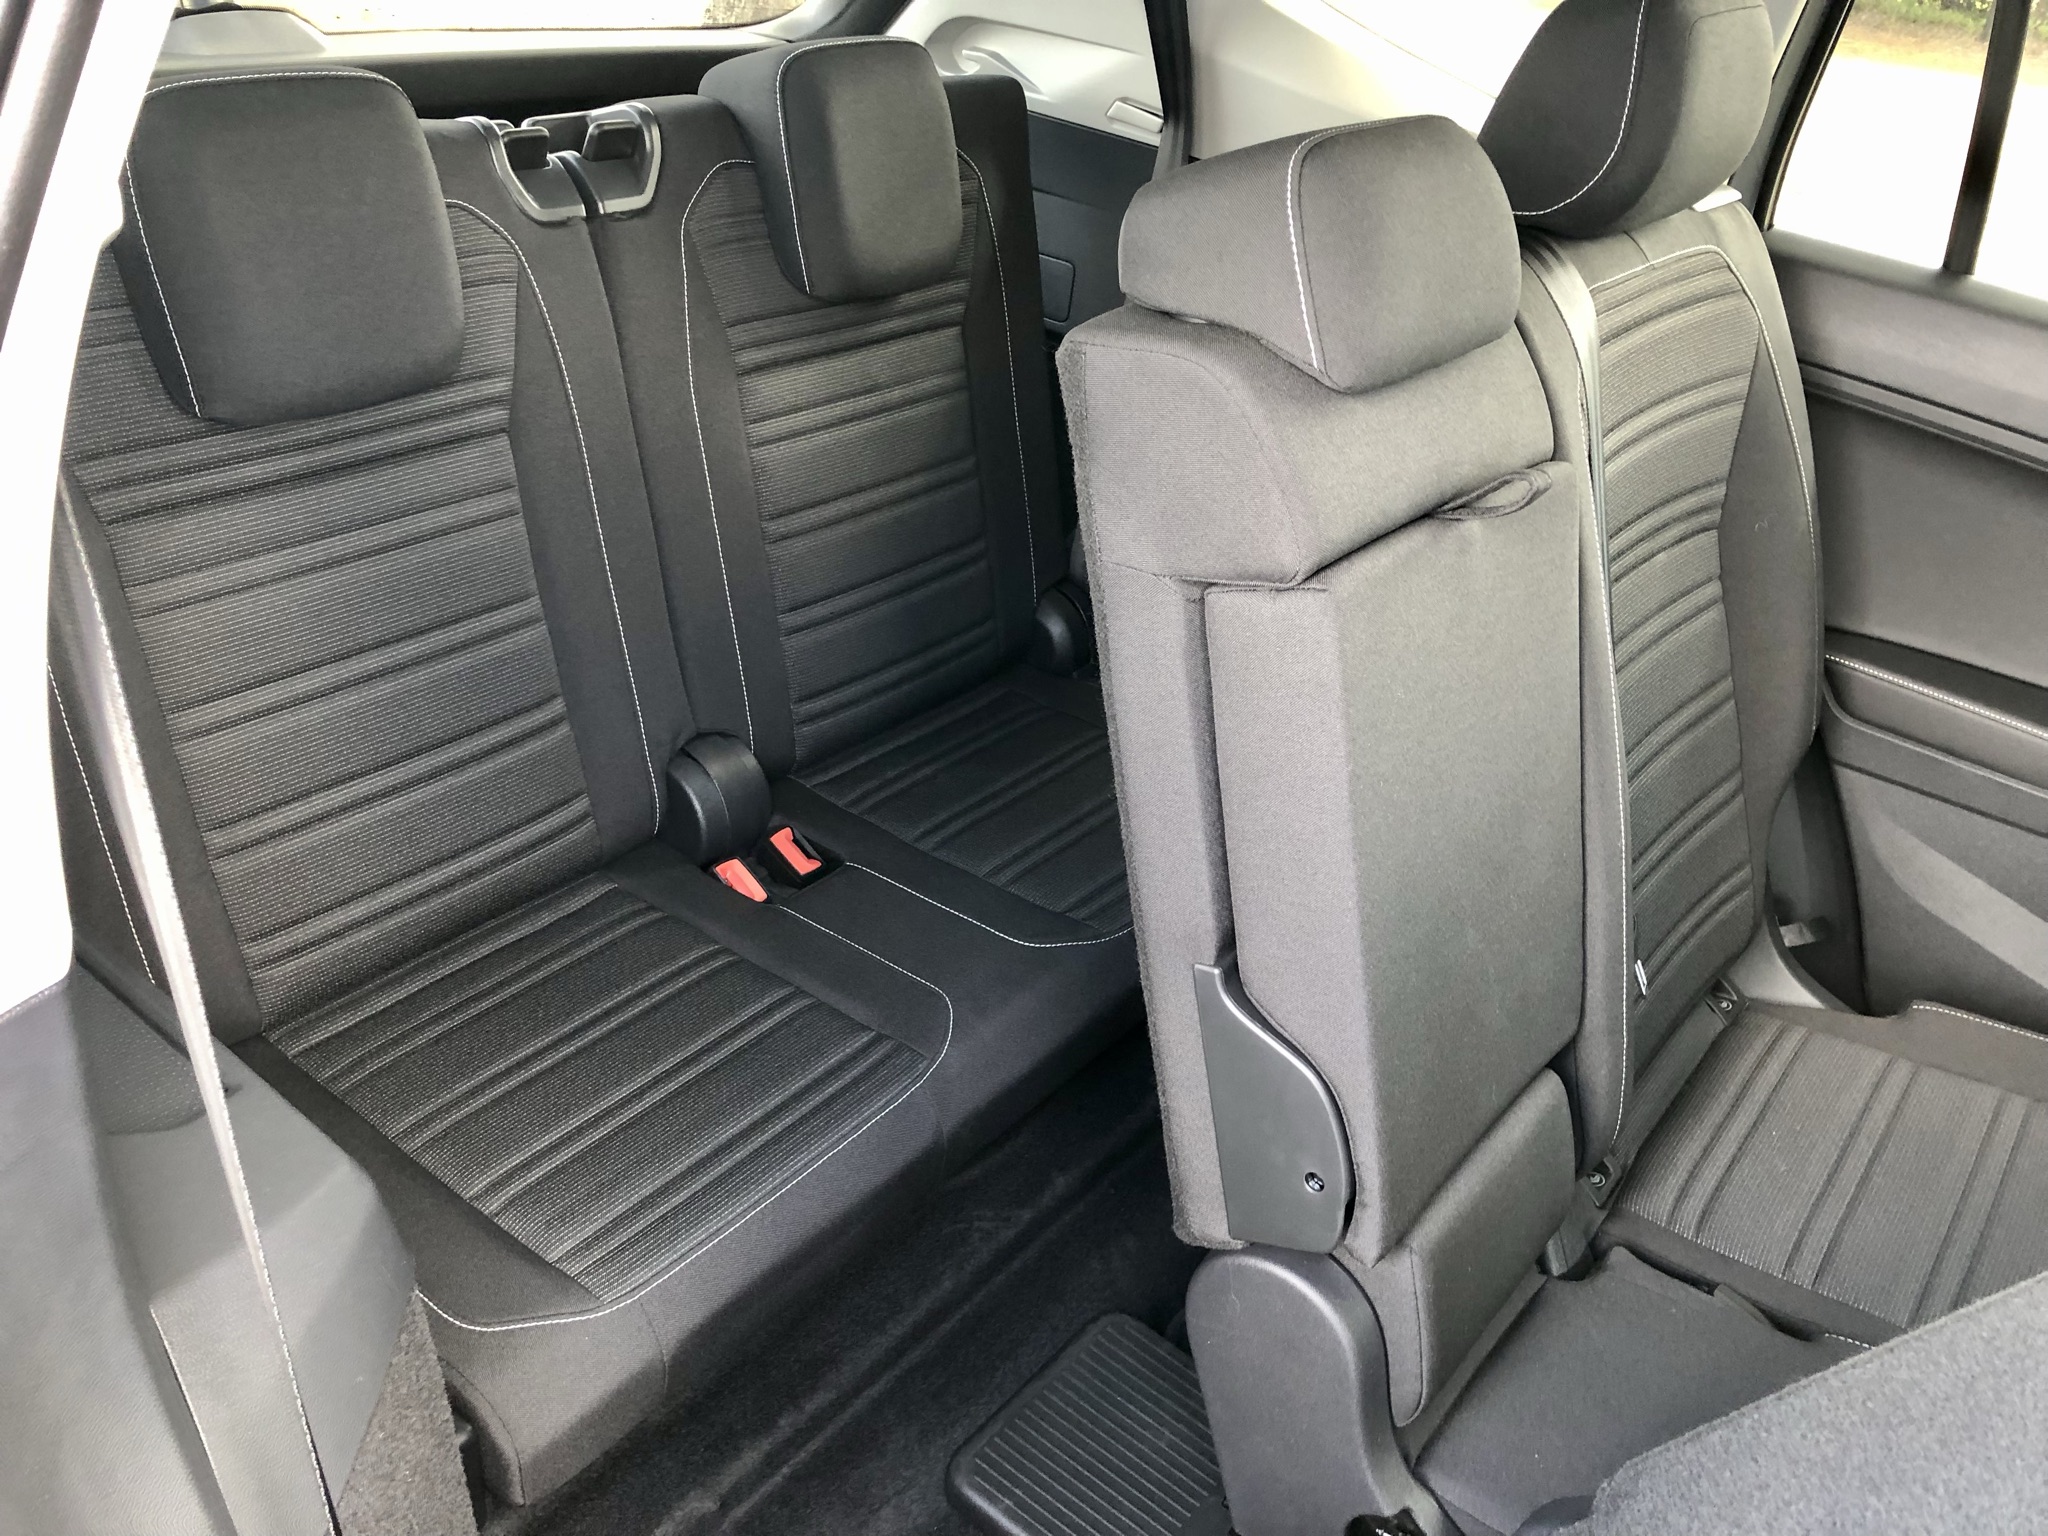 The third row of seats in the Tiguan